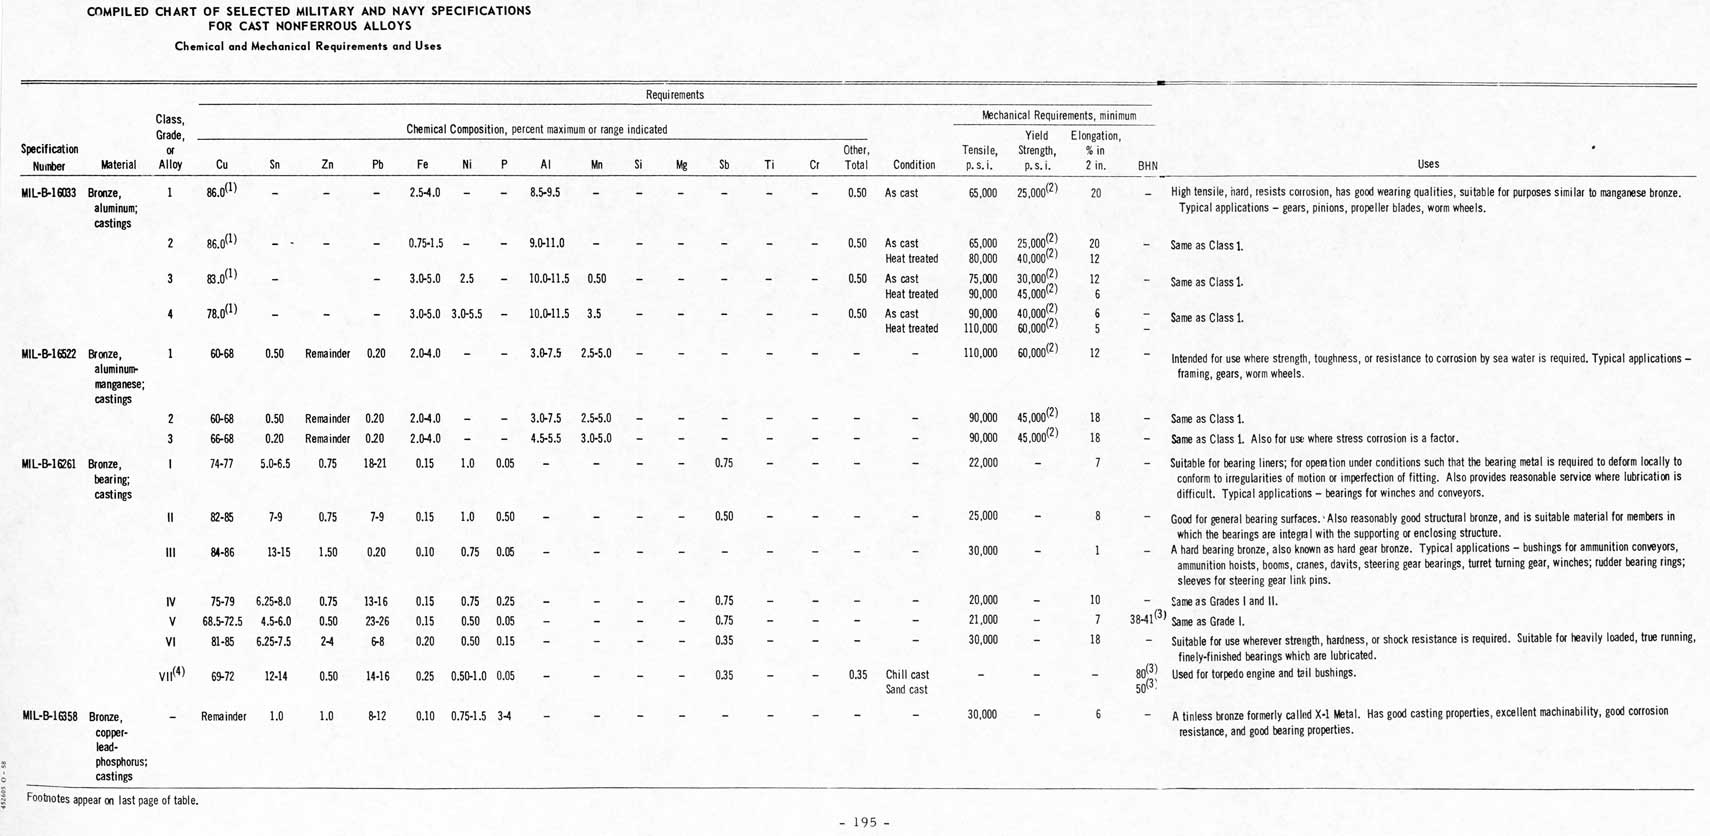 COMPILED CHART OF SELECTED MILITARY AND NAVY SPECIFICATIONS FOR CAST NONFERROUS ALLOYS